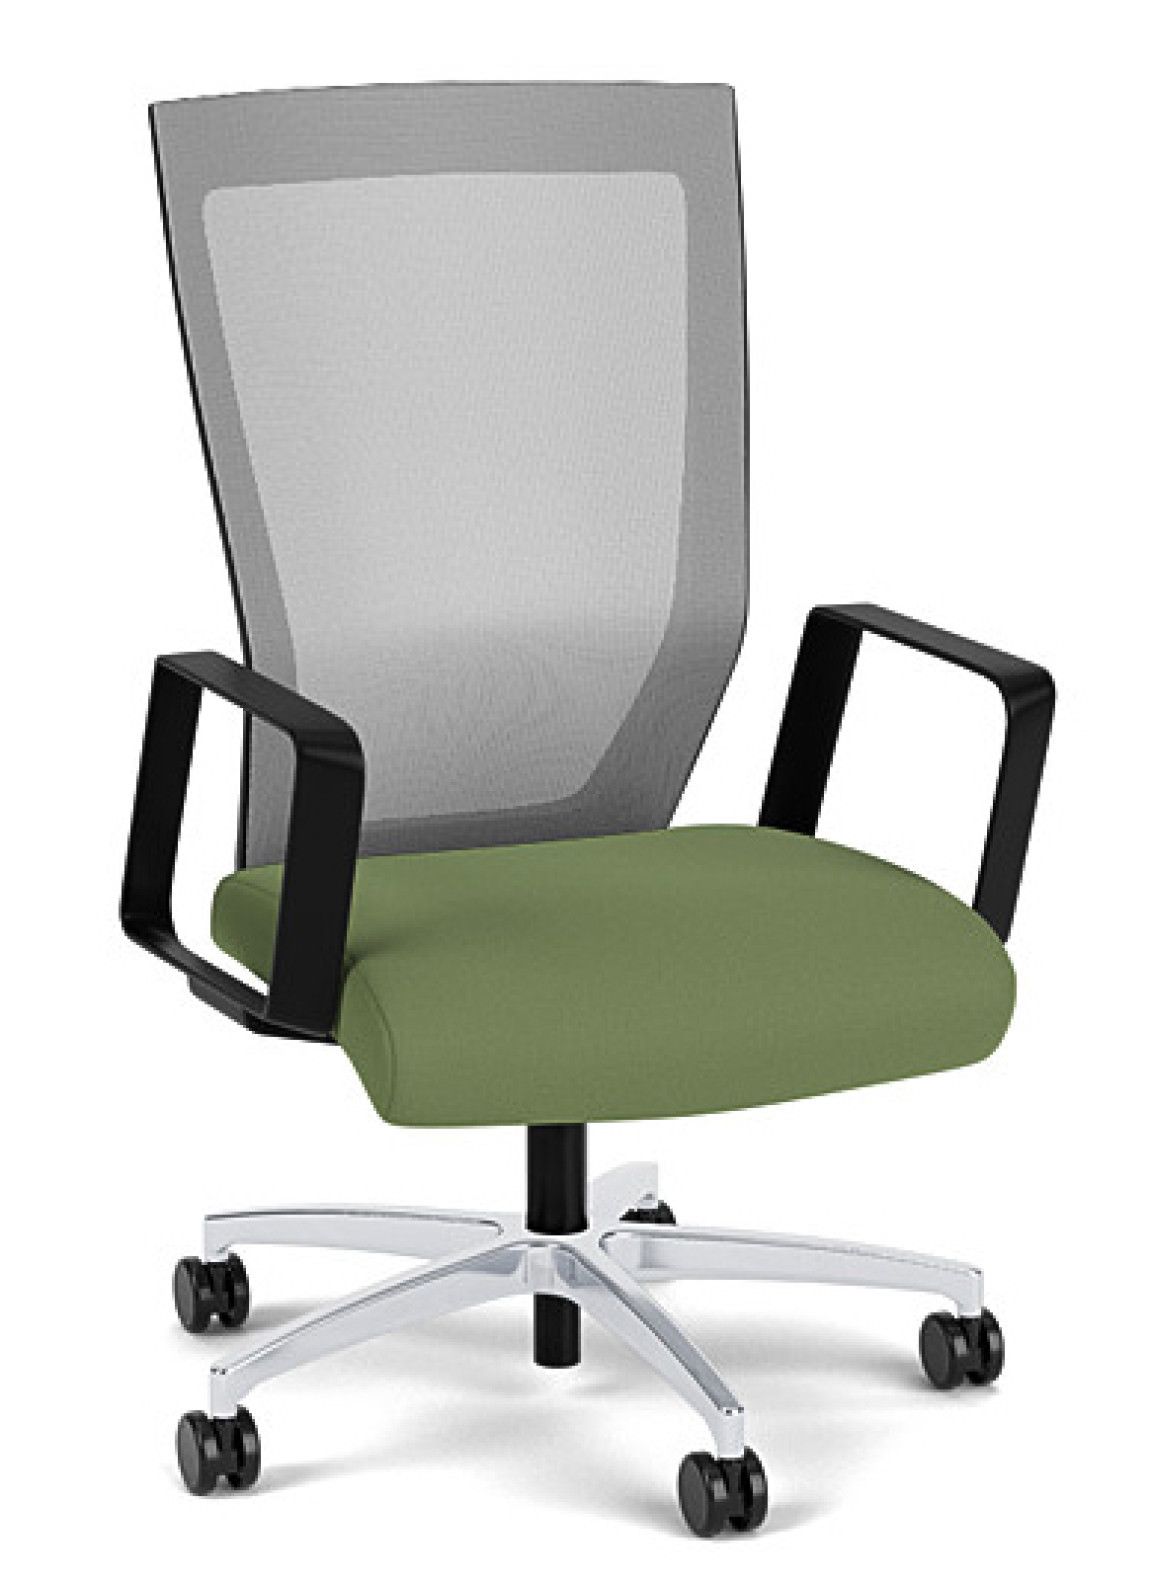 Mesh Back Conference Room Chair